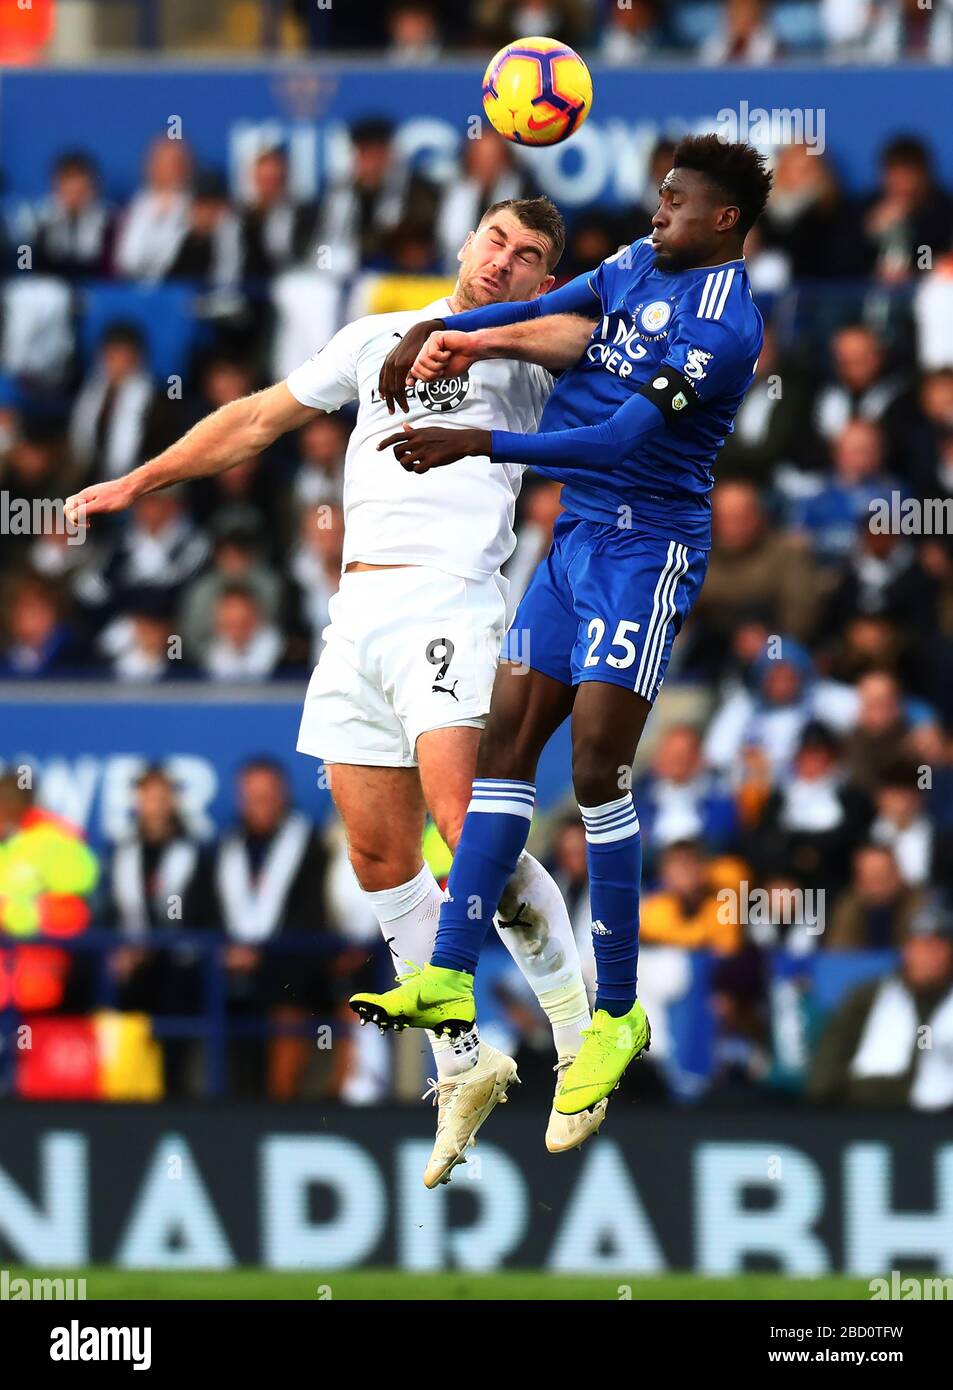 Wilfred Ndidi of Leicester City and Sam Vokes of Burnley in action - Leicester City v Burnley, Premier League, King Power Stadium, Leicester - 10th November 2018 Stock Photo